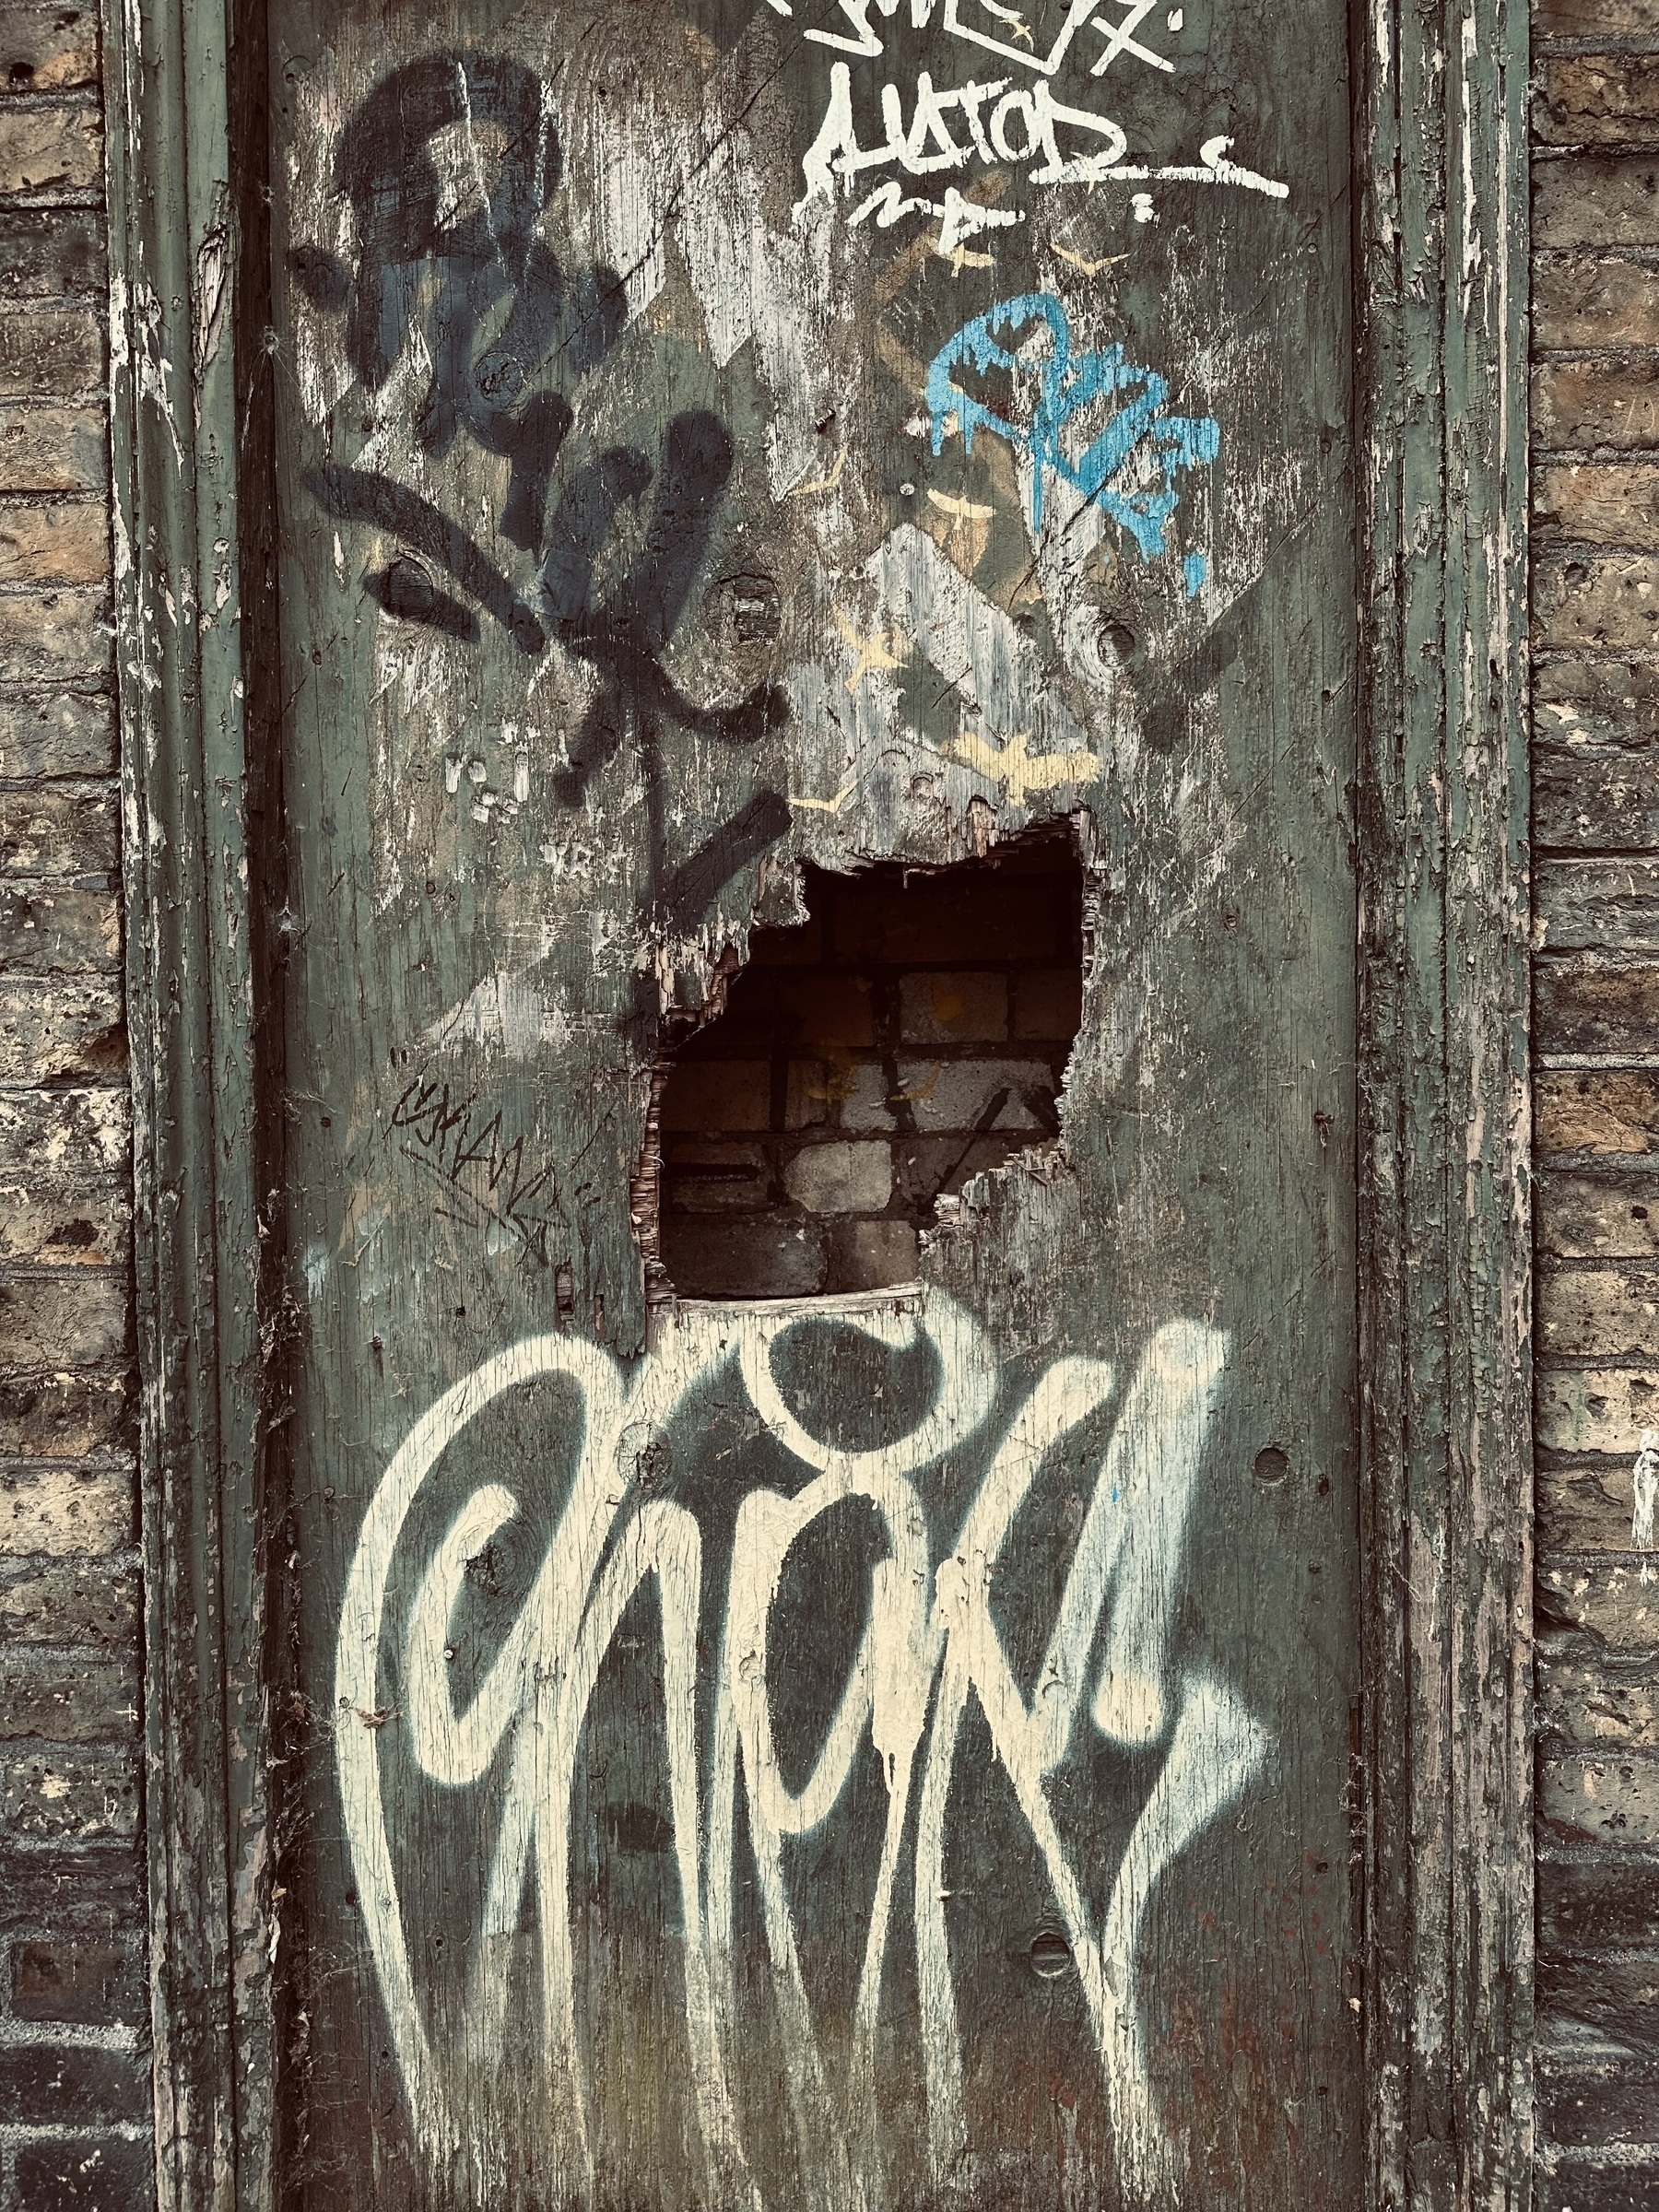 A wooden door, painted green, with some graffiti on it. There’s a hole in the middle of the door, revealing a brick wall just behind.